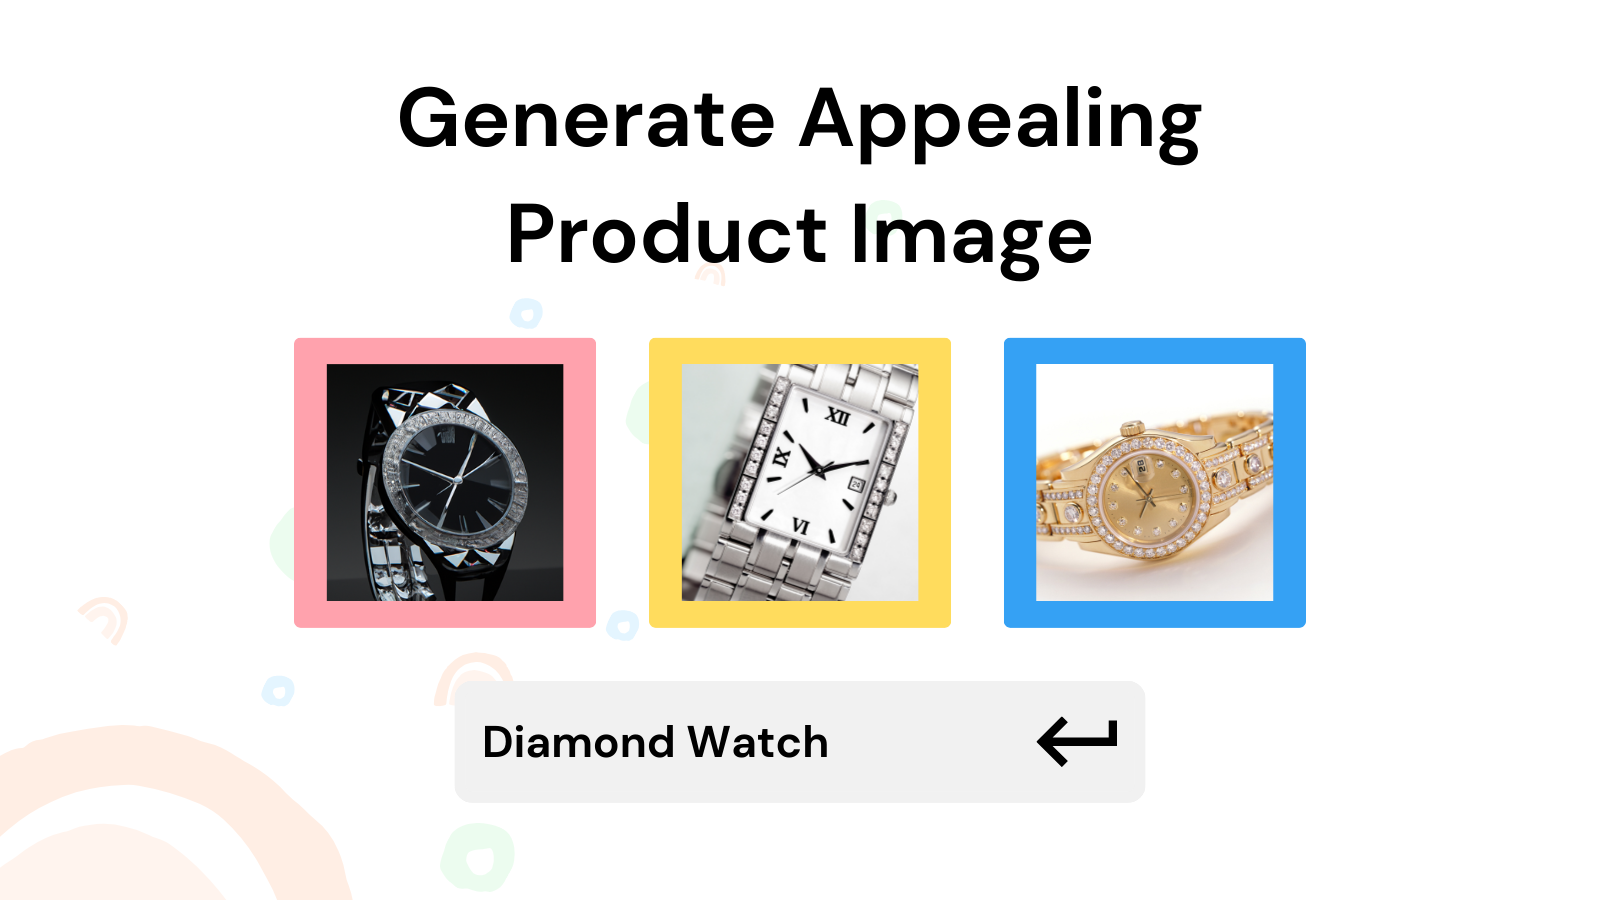 Generate appealing product image